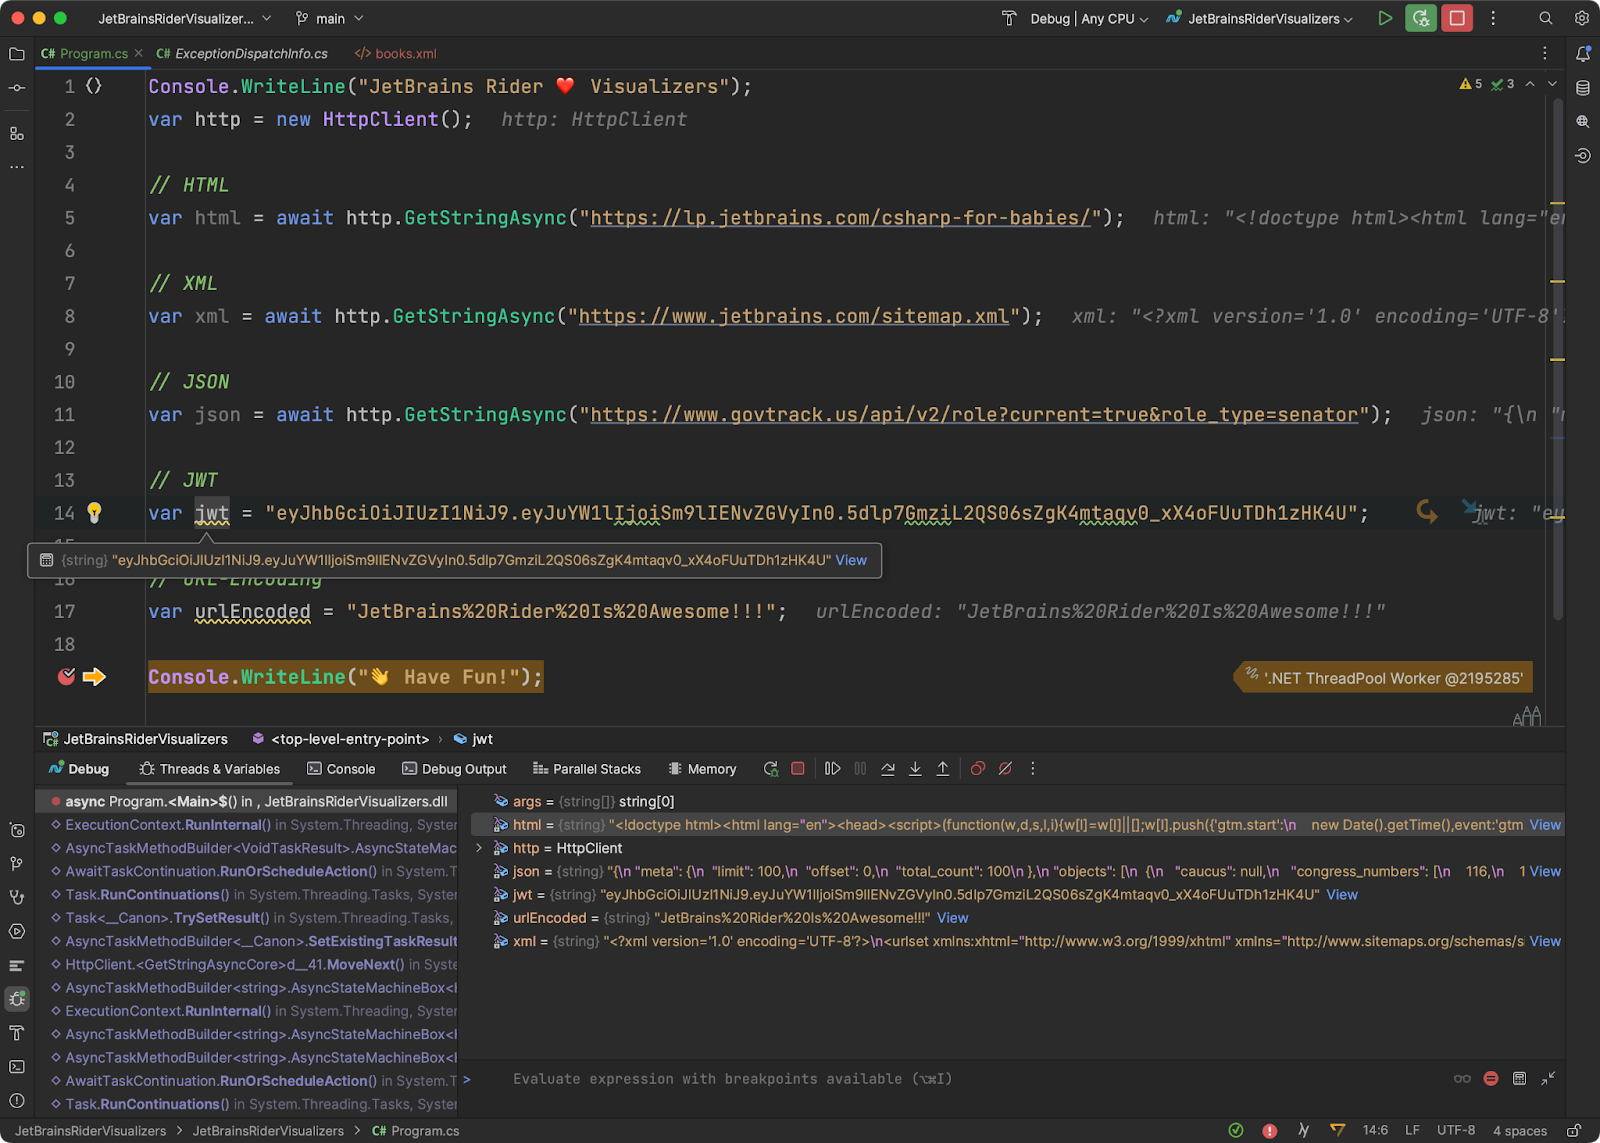 JetBrains Rider debugging the code to show visualizers